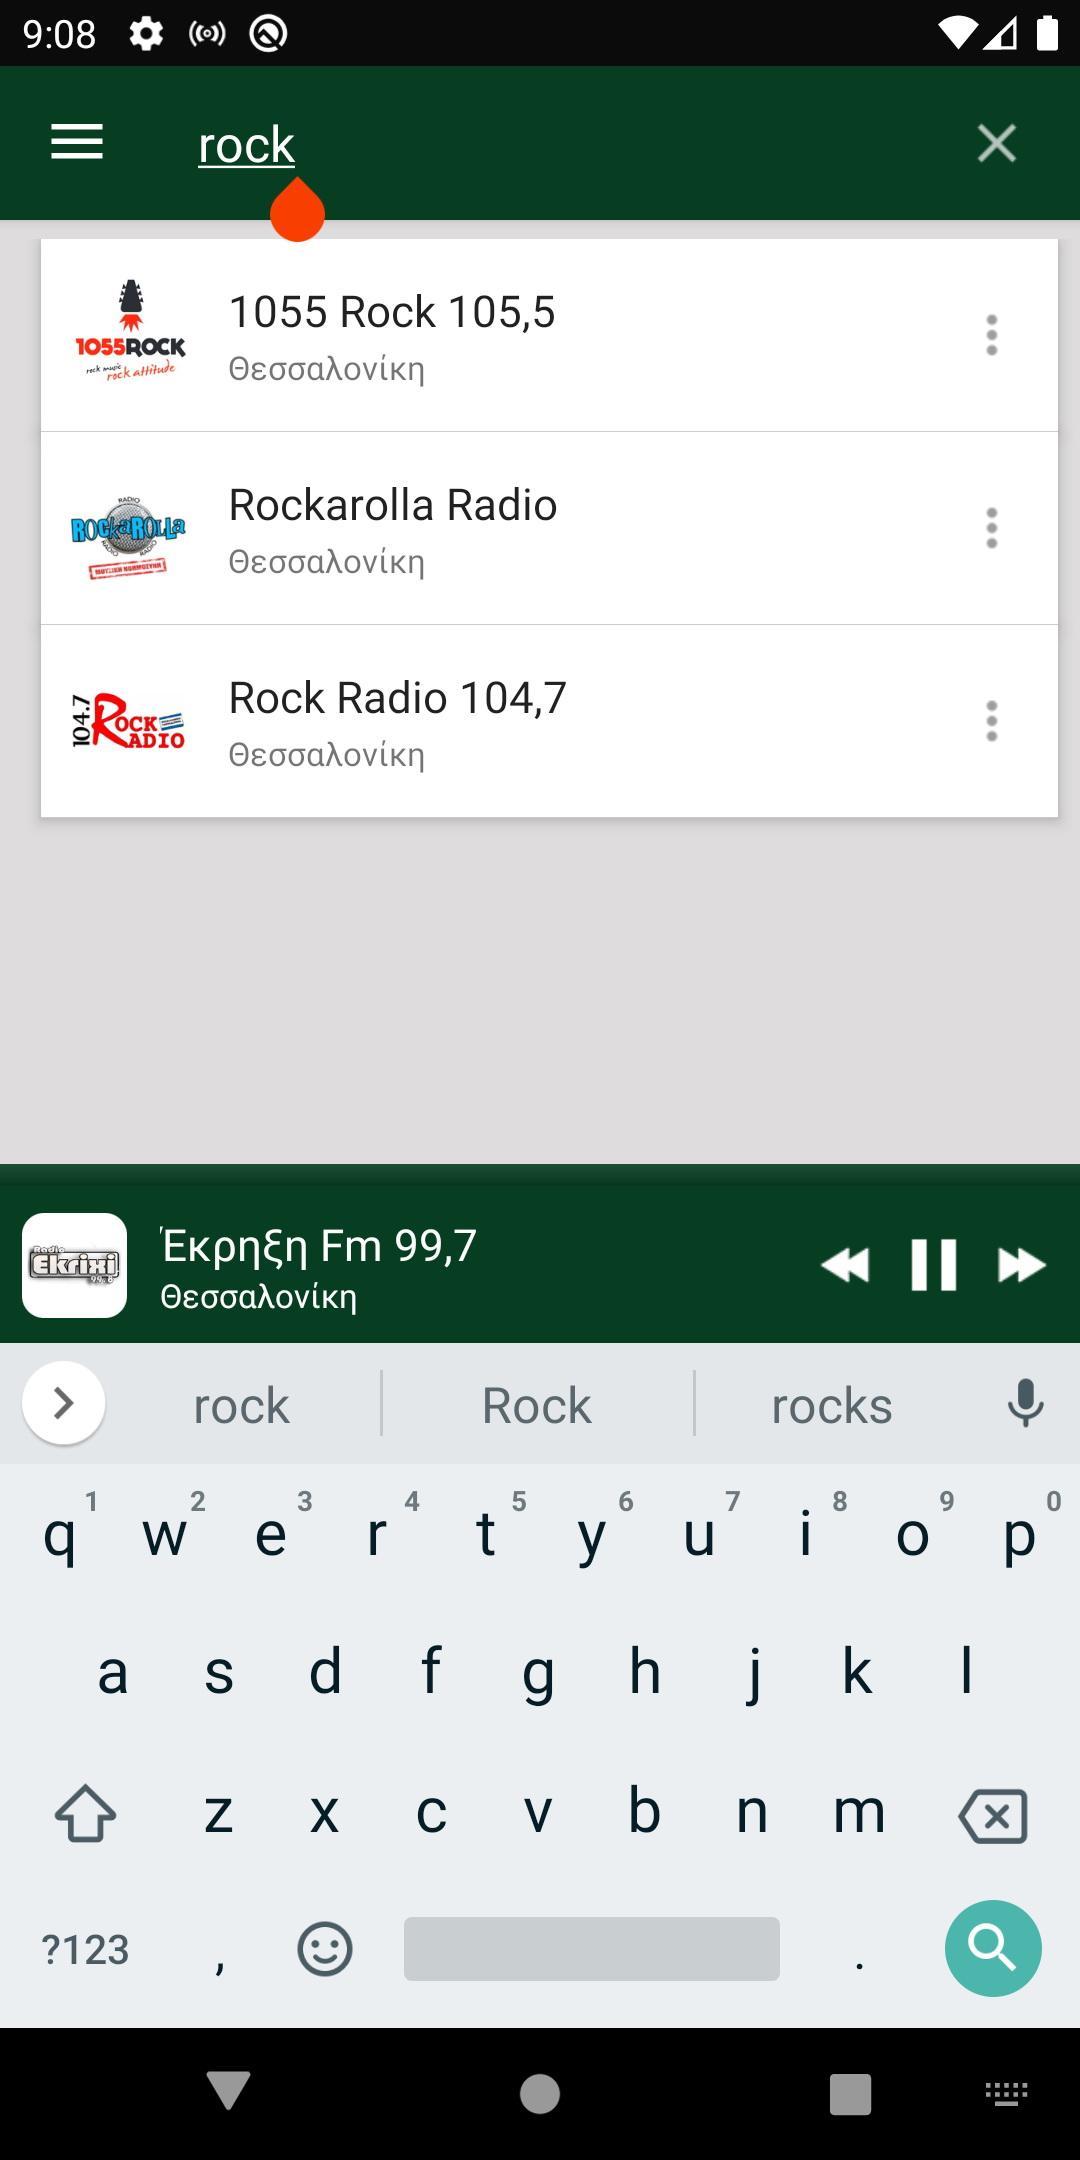 Thessaloniki Radio Stations - Greece for Android - APK Download